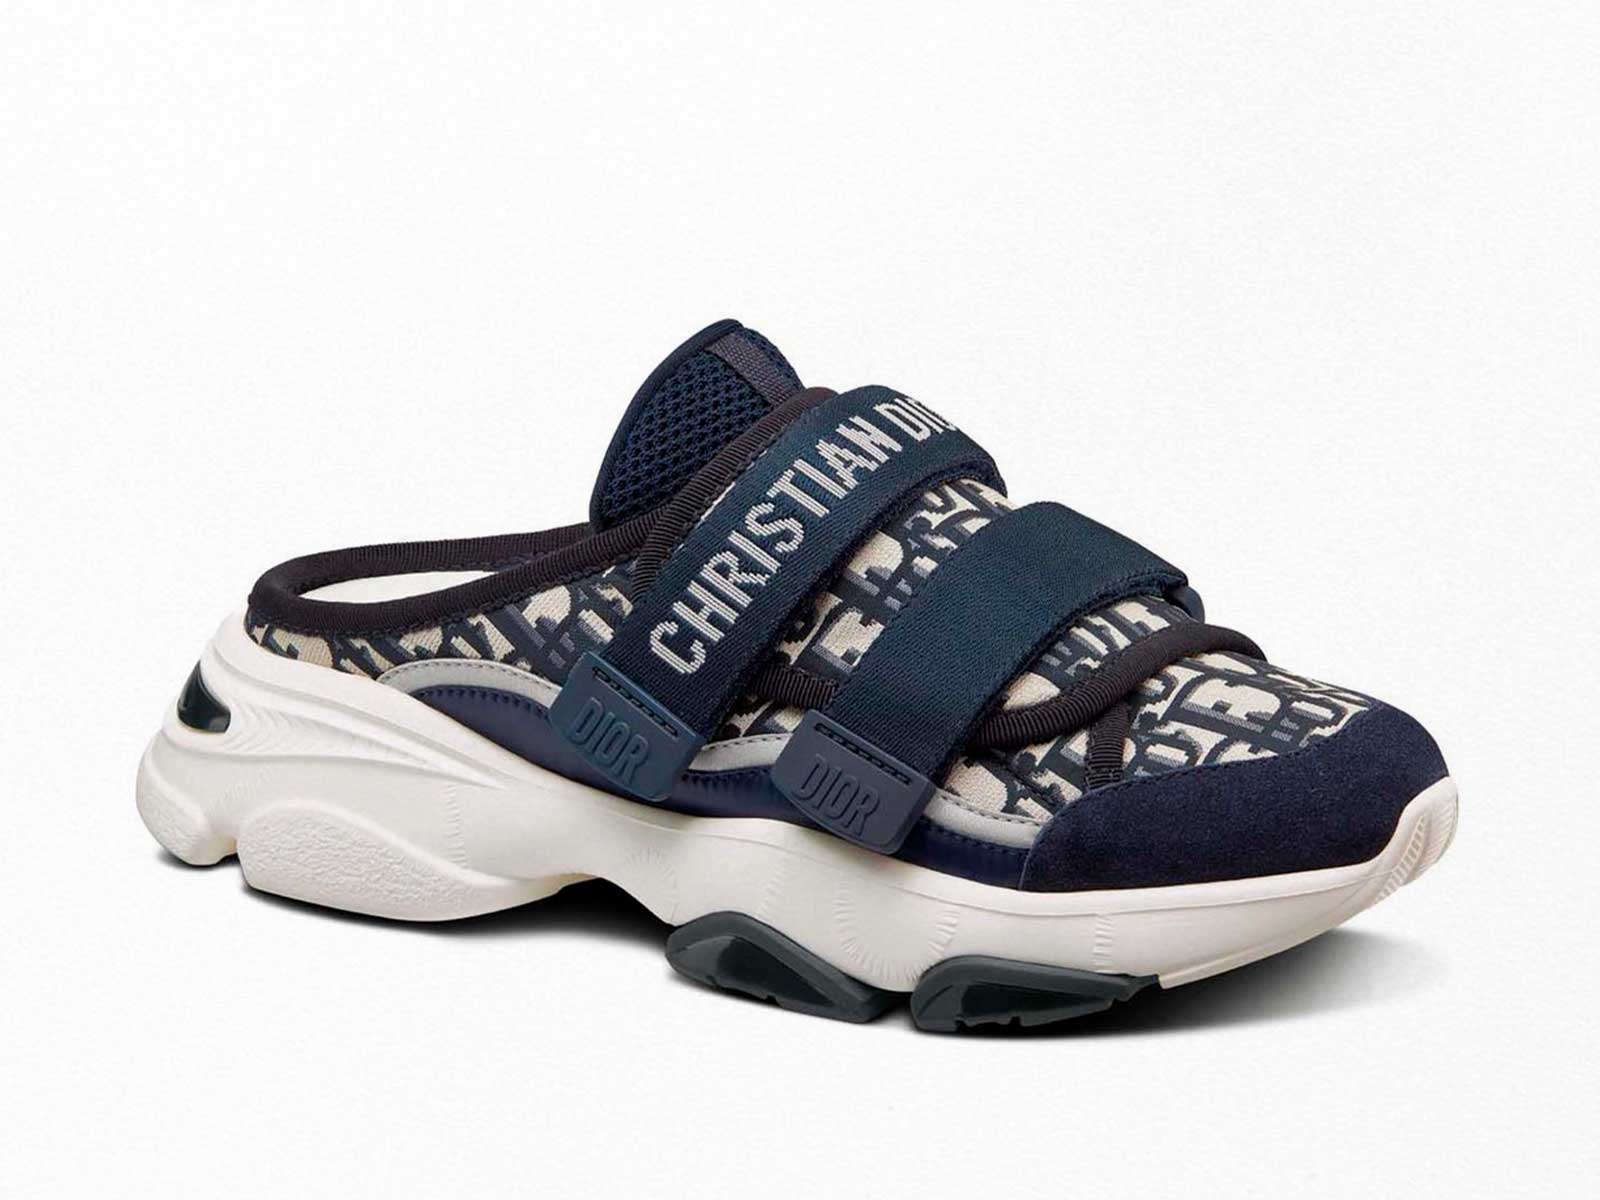 We need the new D-Wander by Dior and we need them now